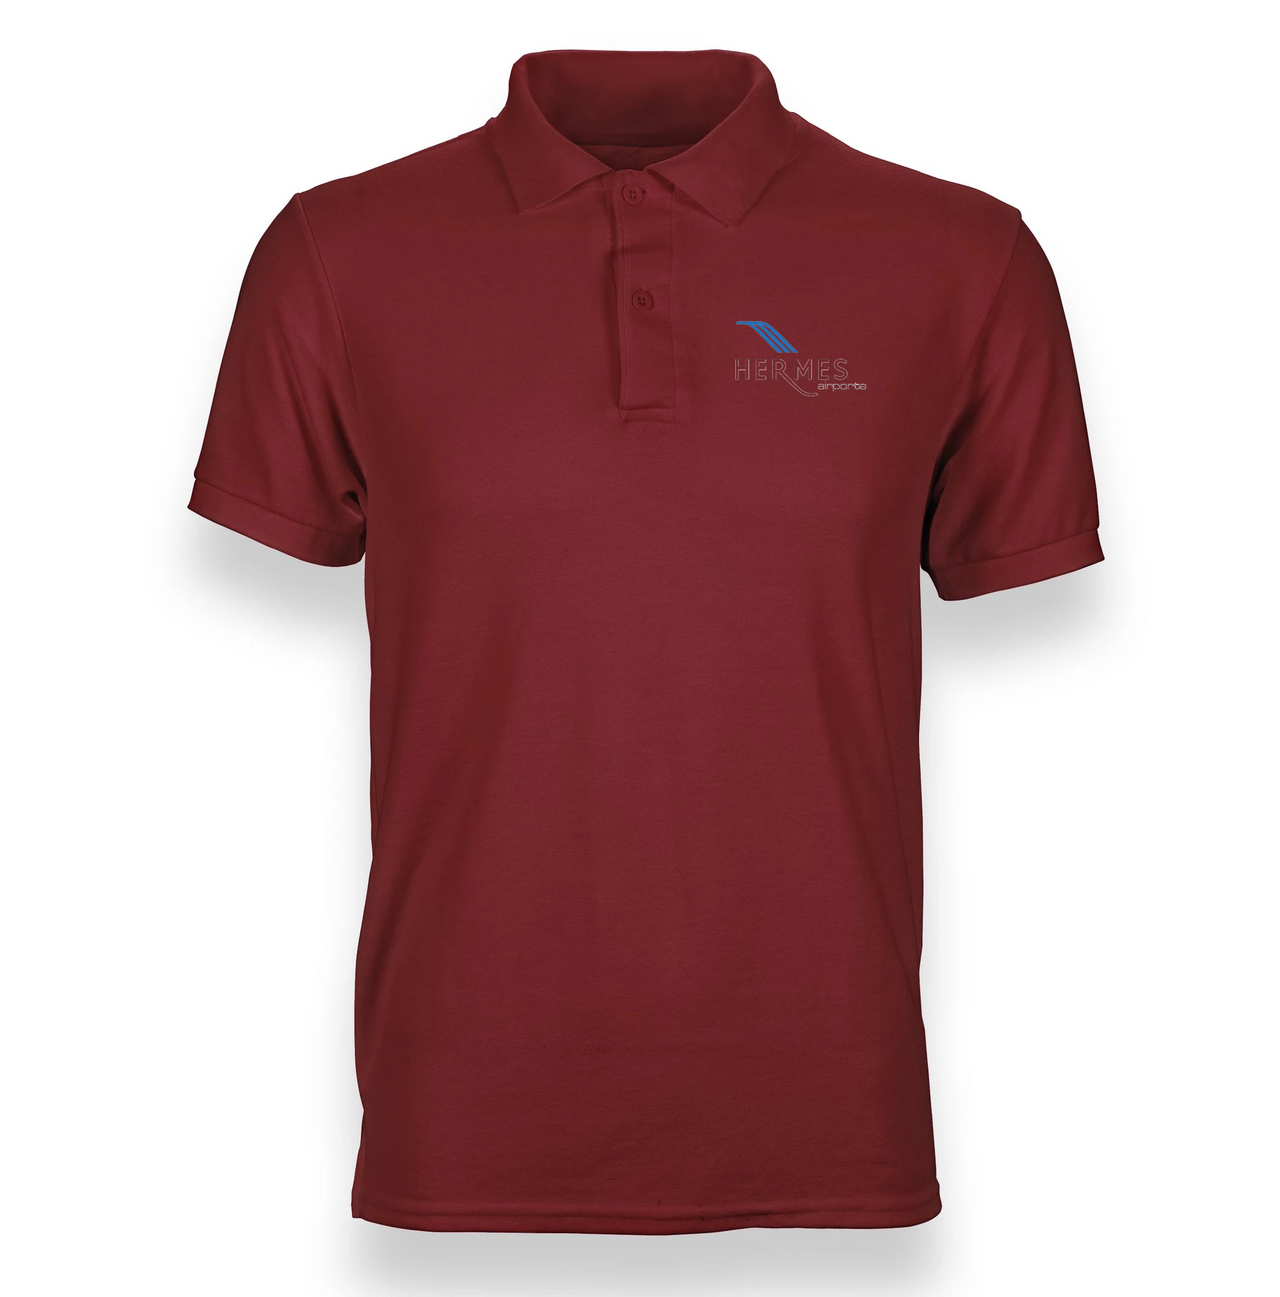 HERMES AIRLINES POLO T-SHIRT